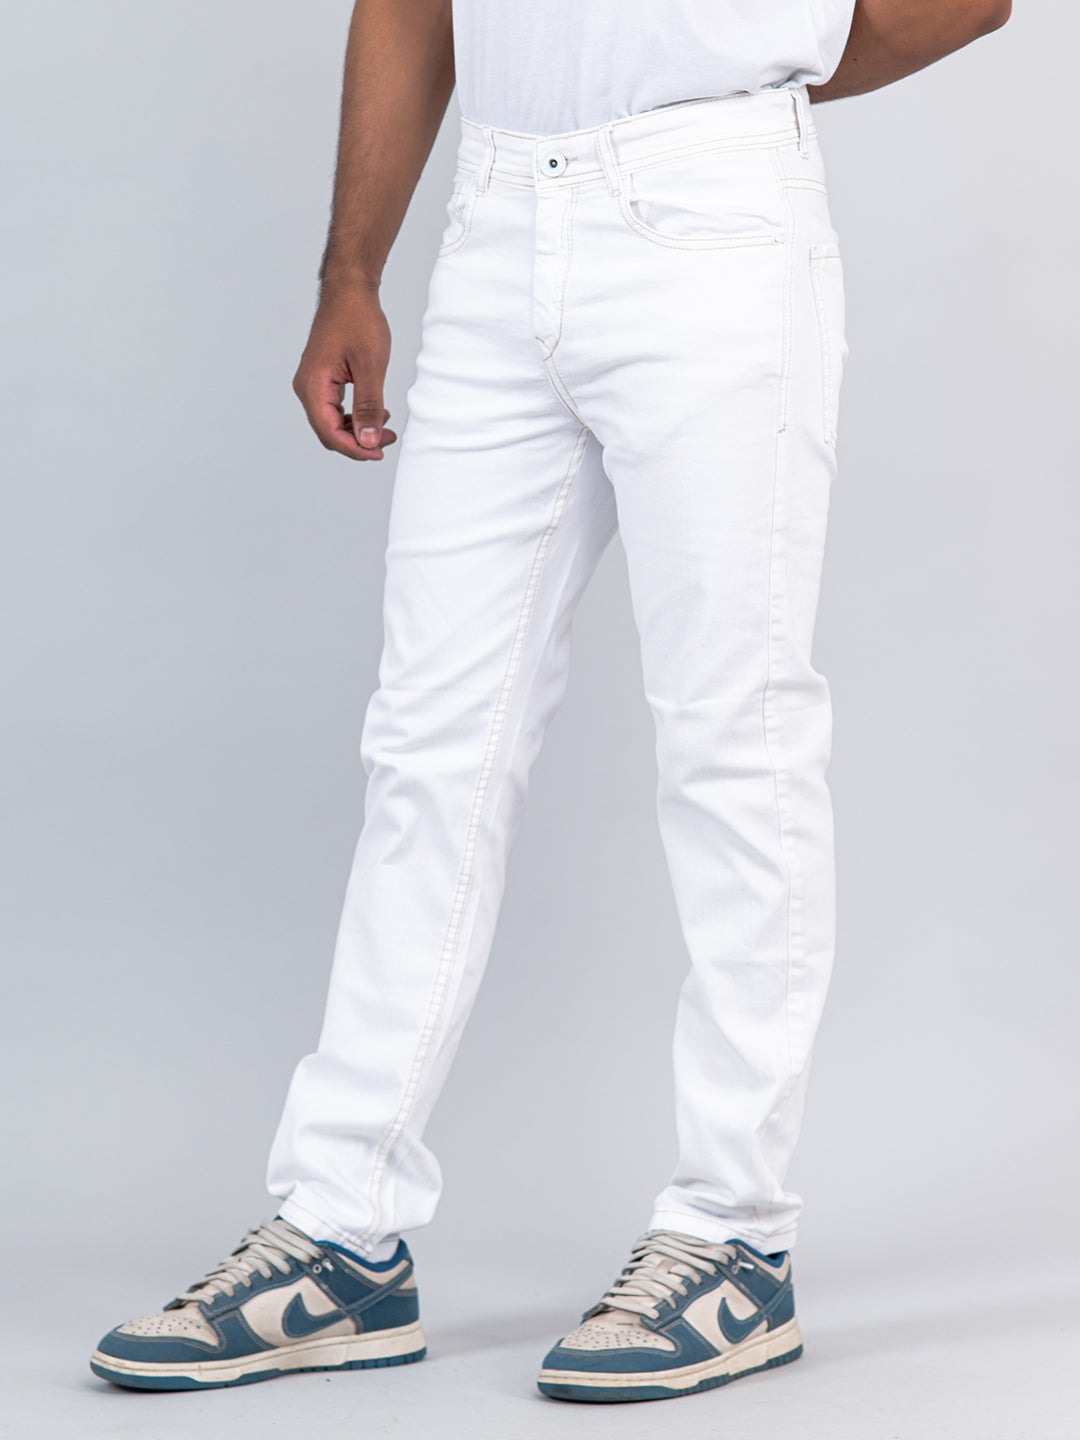 Men Jeans - Buy Men Jeans Online at Best Price in India | Suvidha Stores